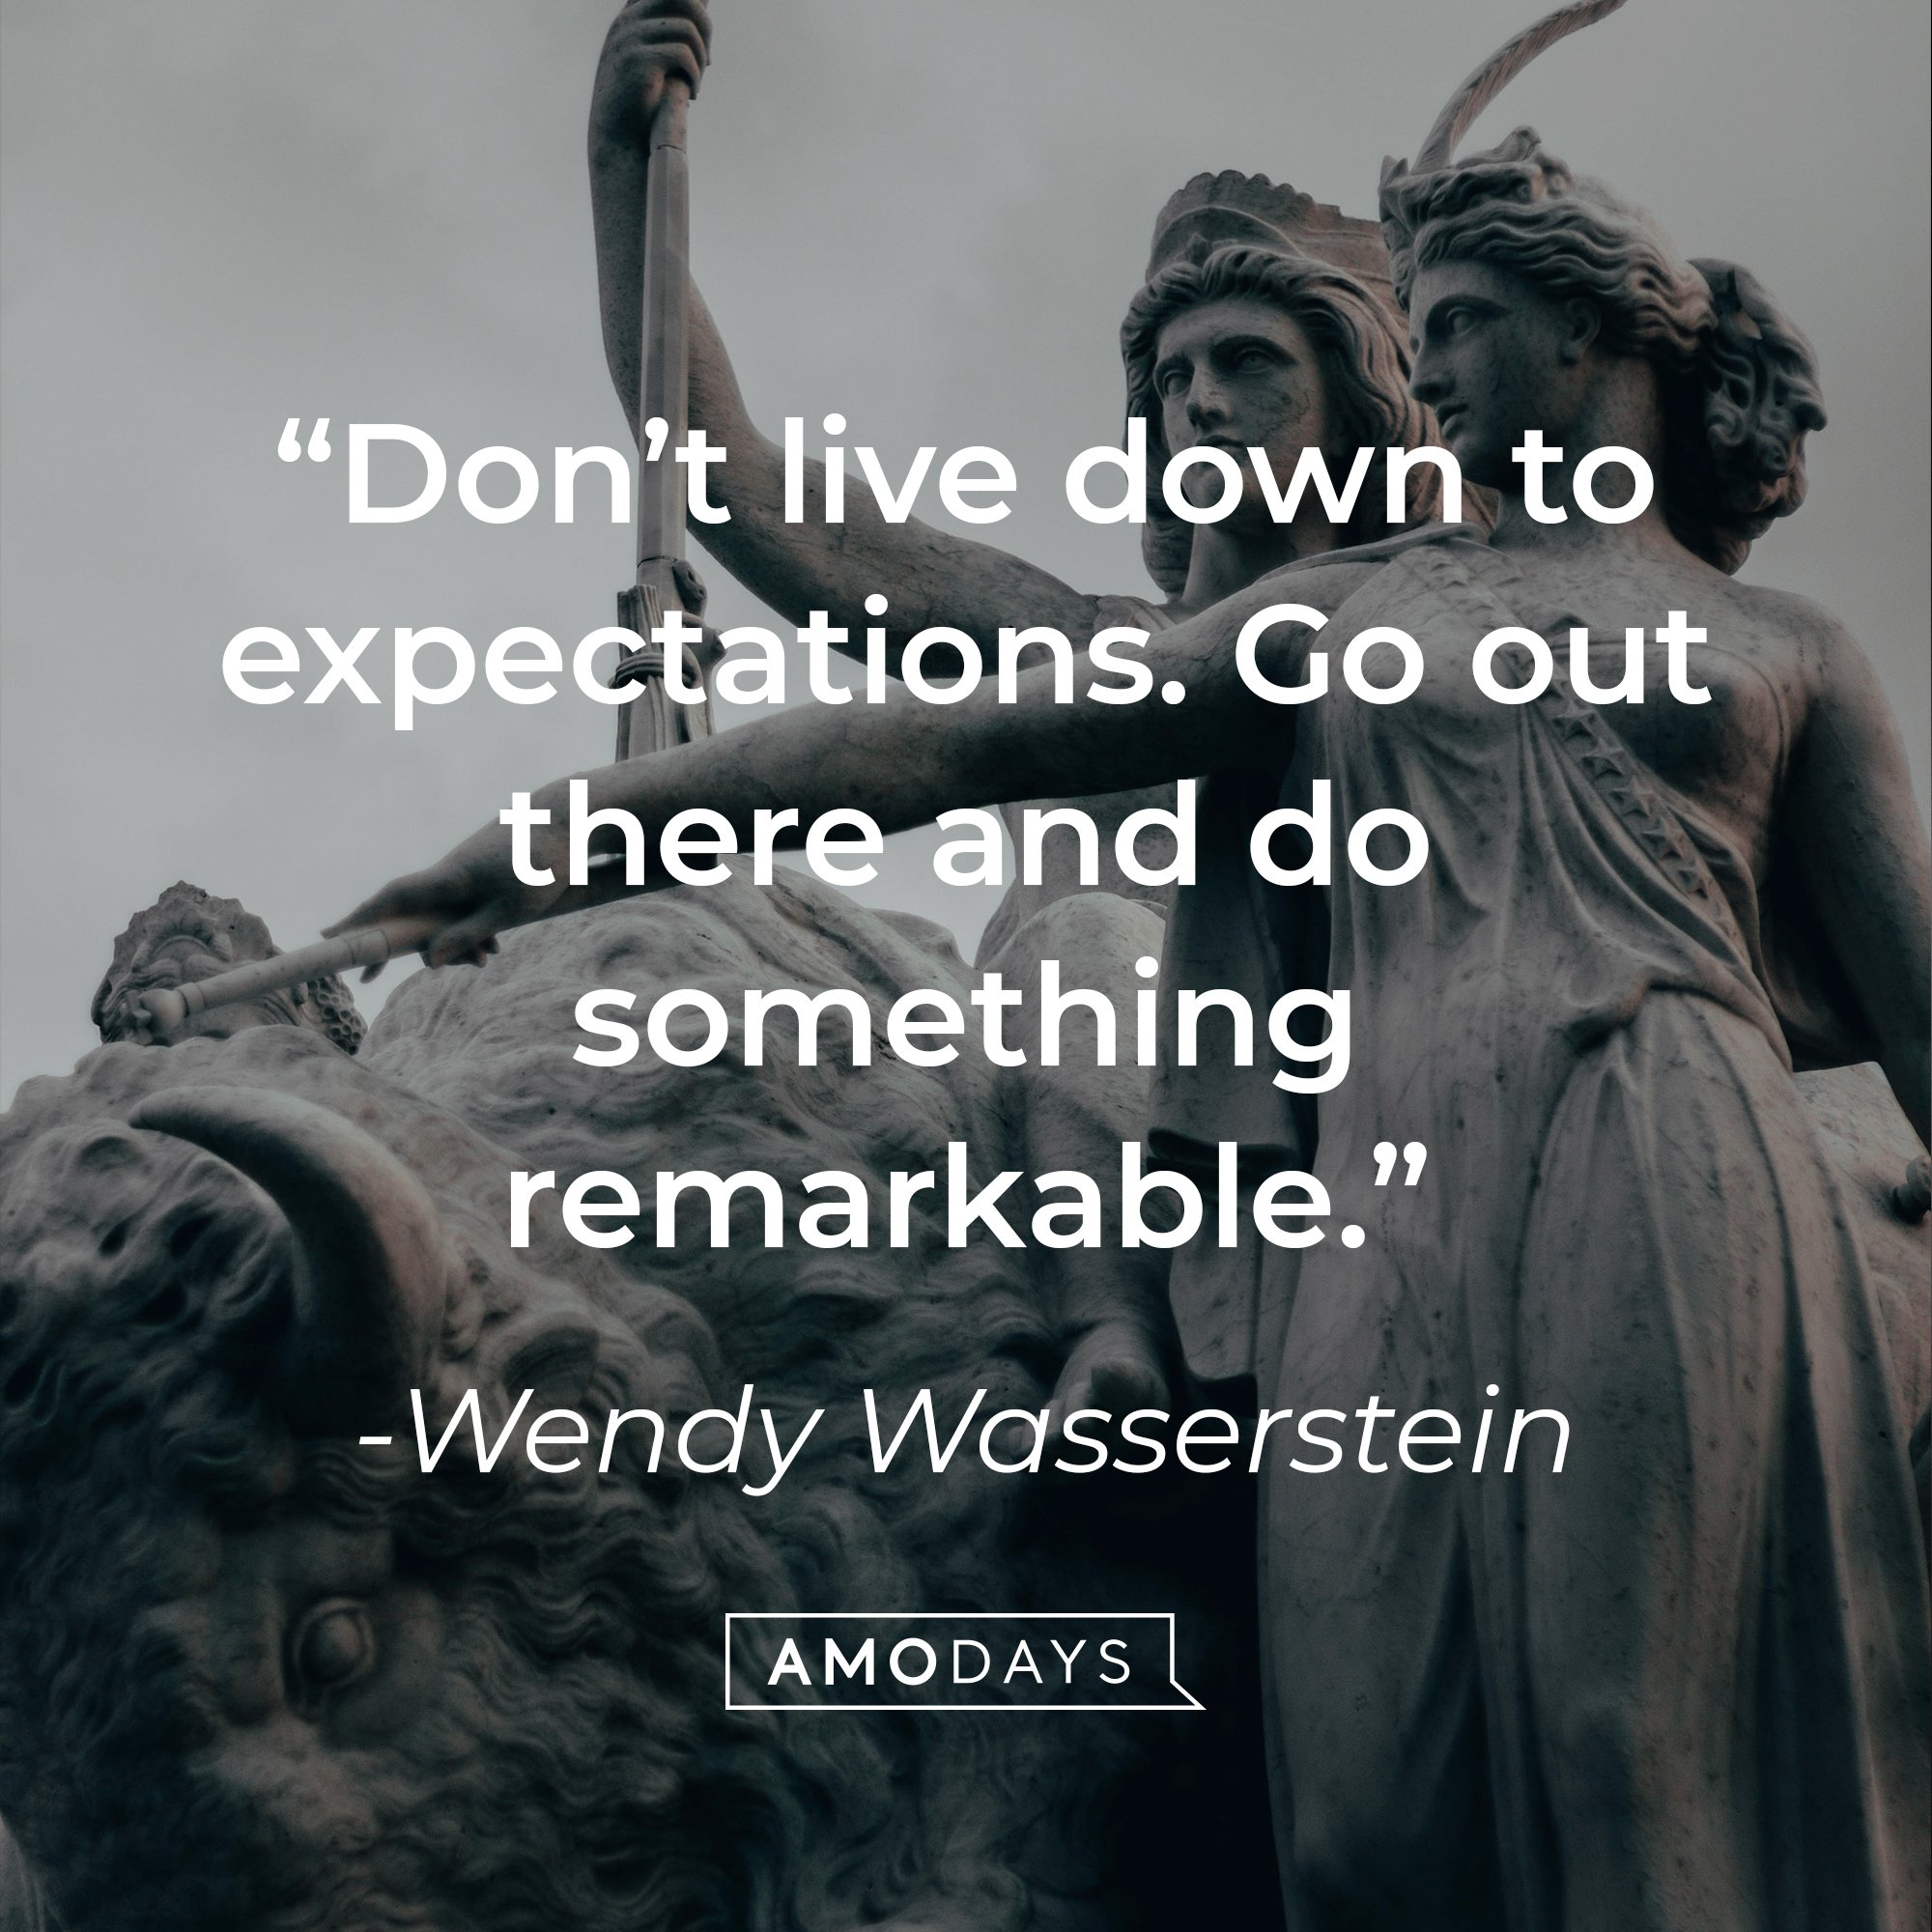  Wendy Wasserstein';s quote: "Don’t live down to expectations. Go out there and do something remarkable.” | Image: AmoDays